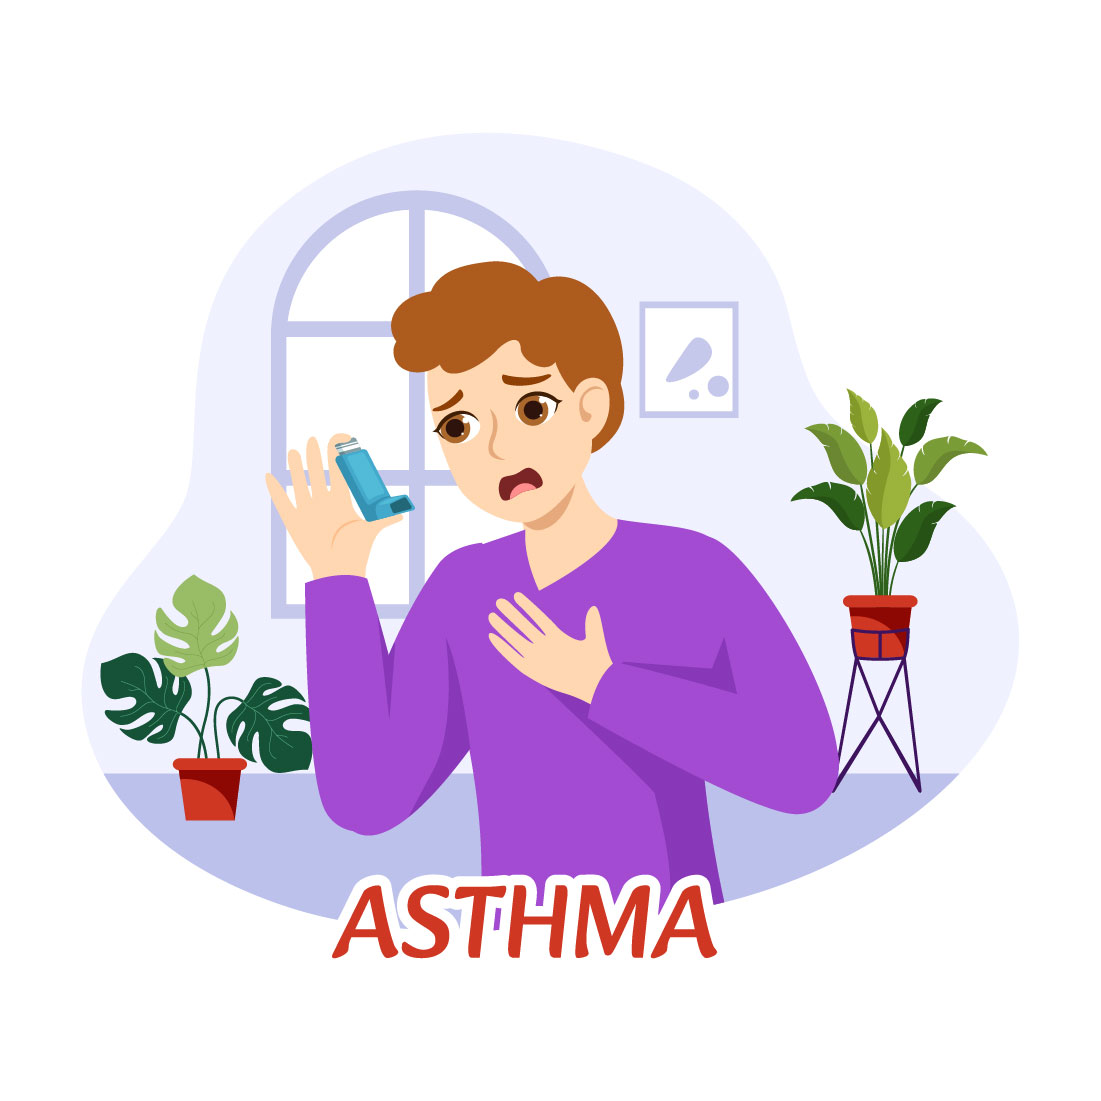 12 Asthma Disease Vector Illustration cover image.